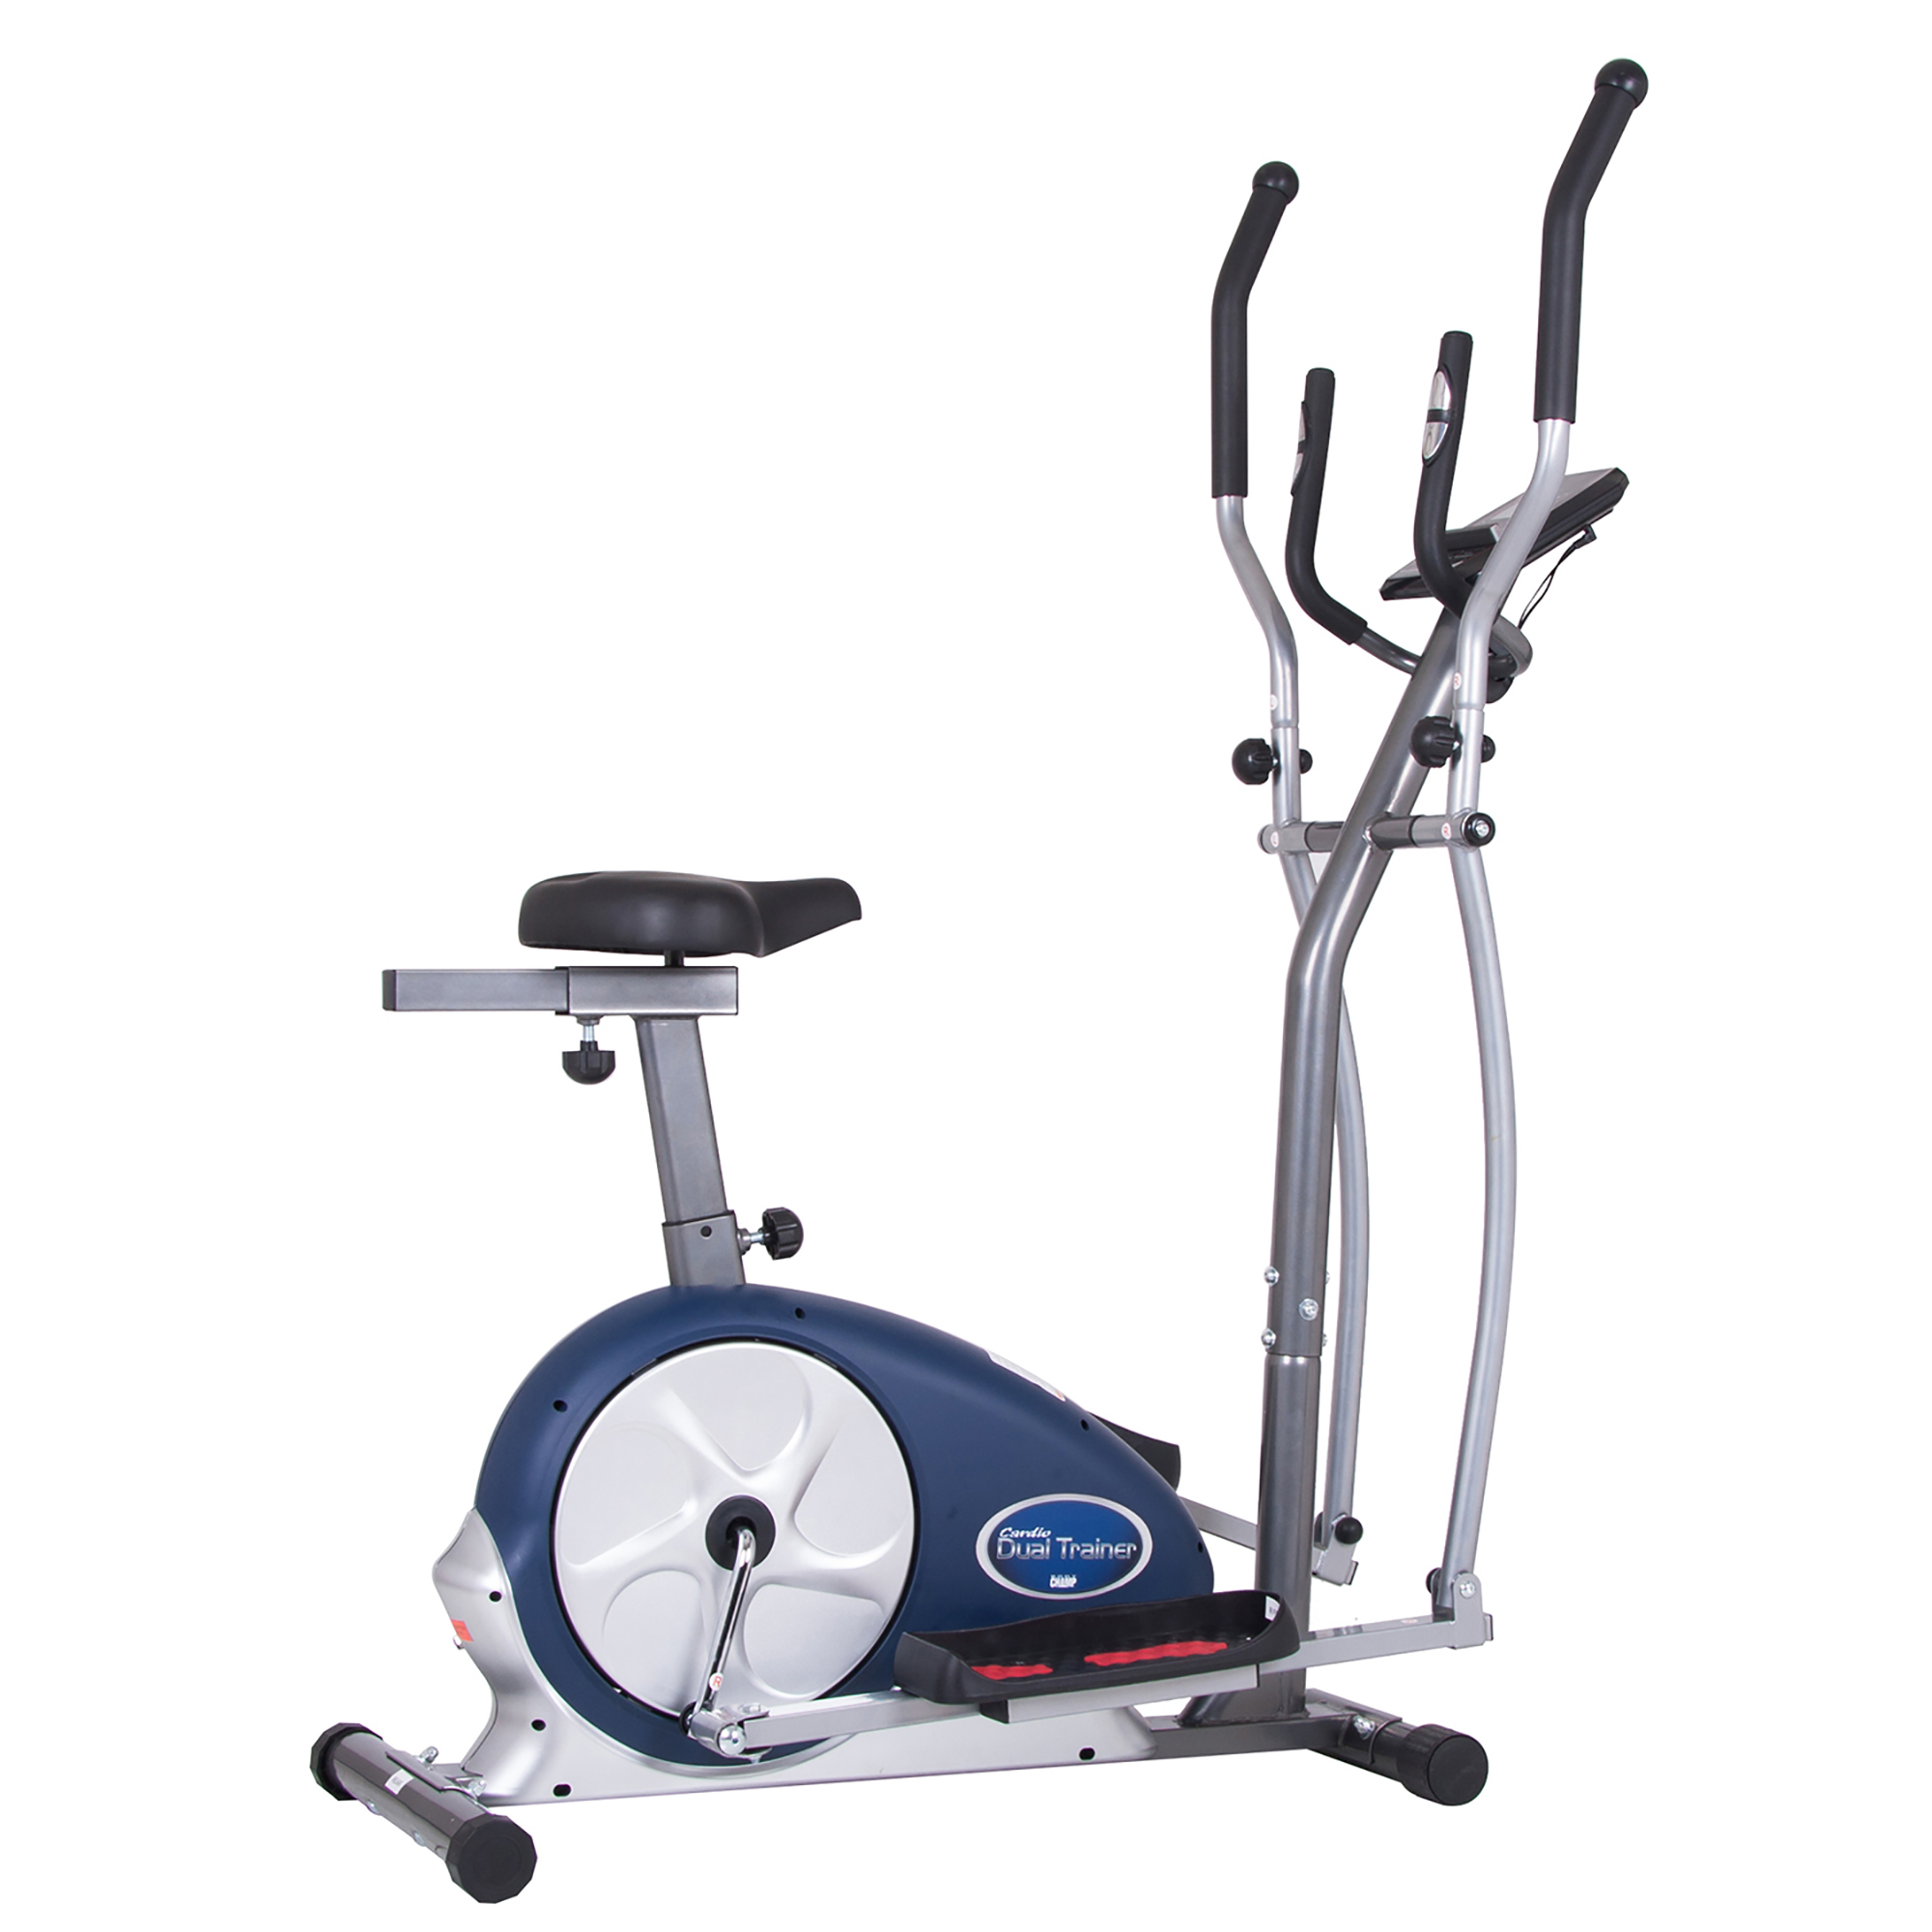 Body Champ BRM3671 Elliptical and Exercise Bike Dual Trainer - image 2 of 8